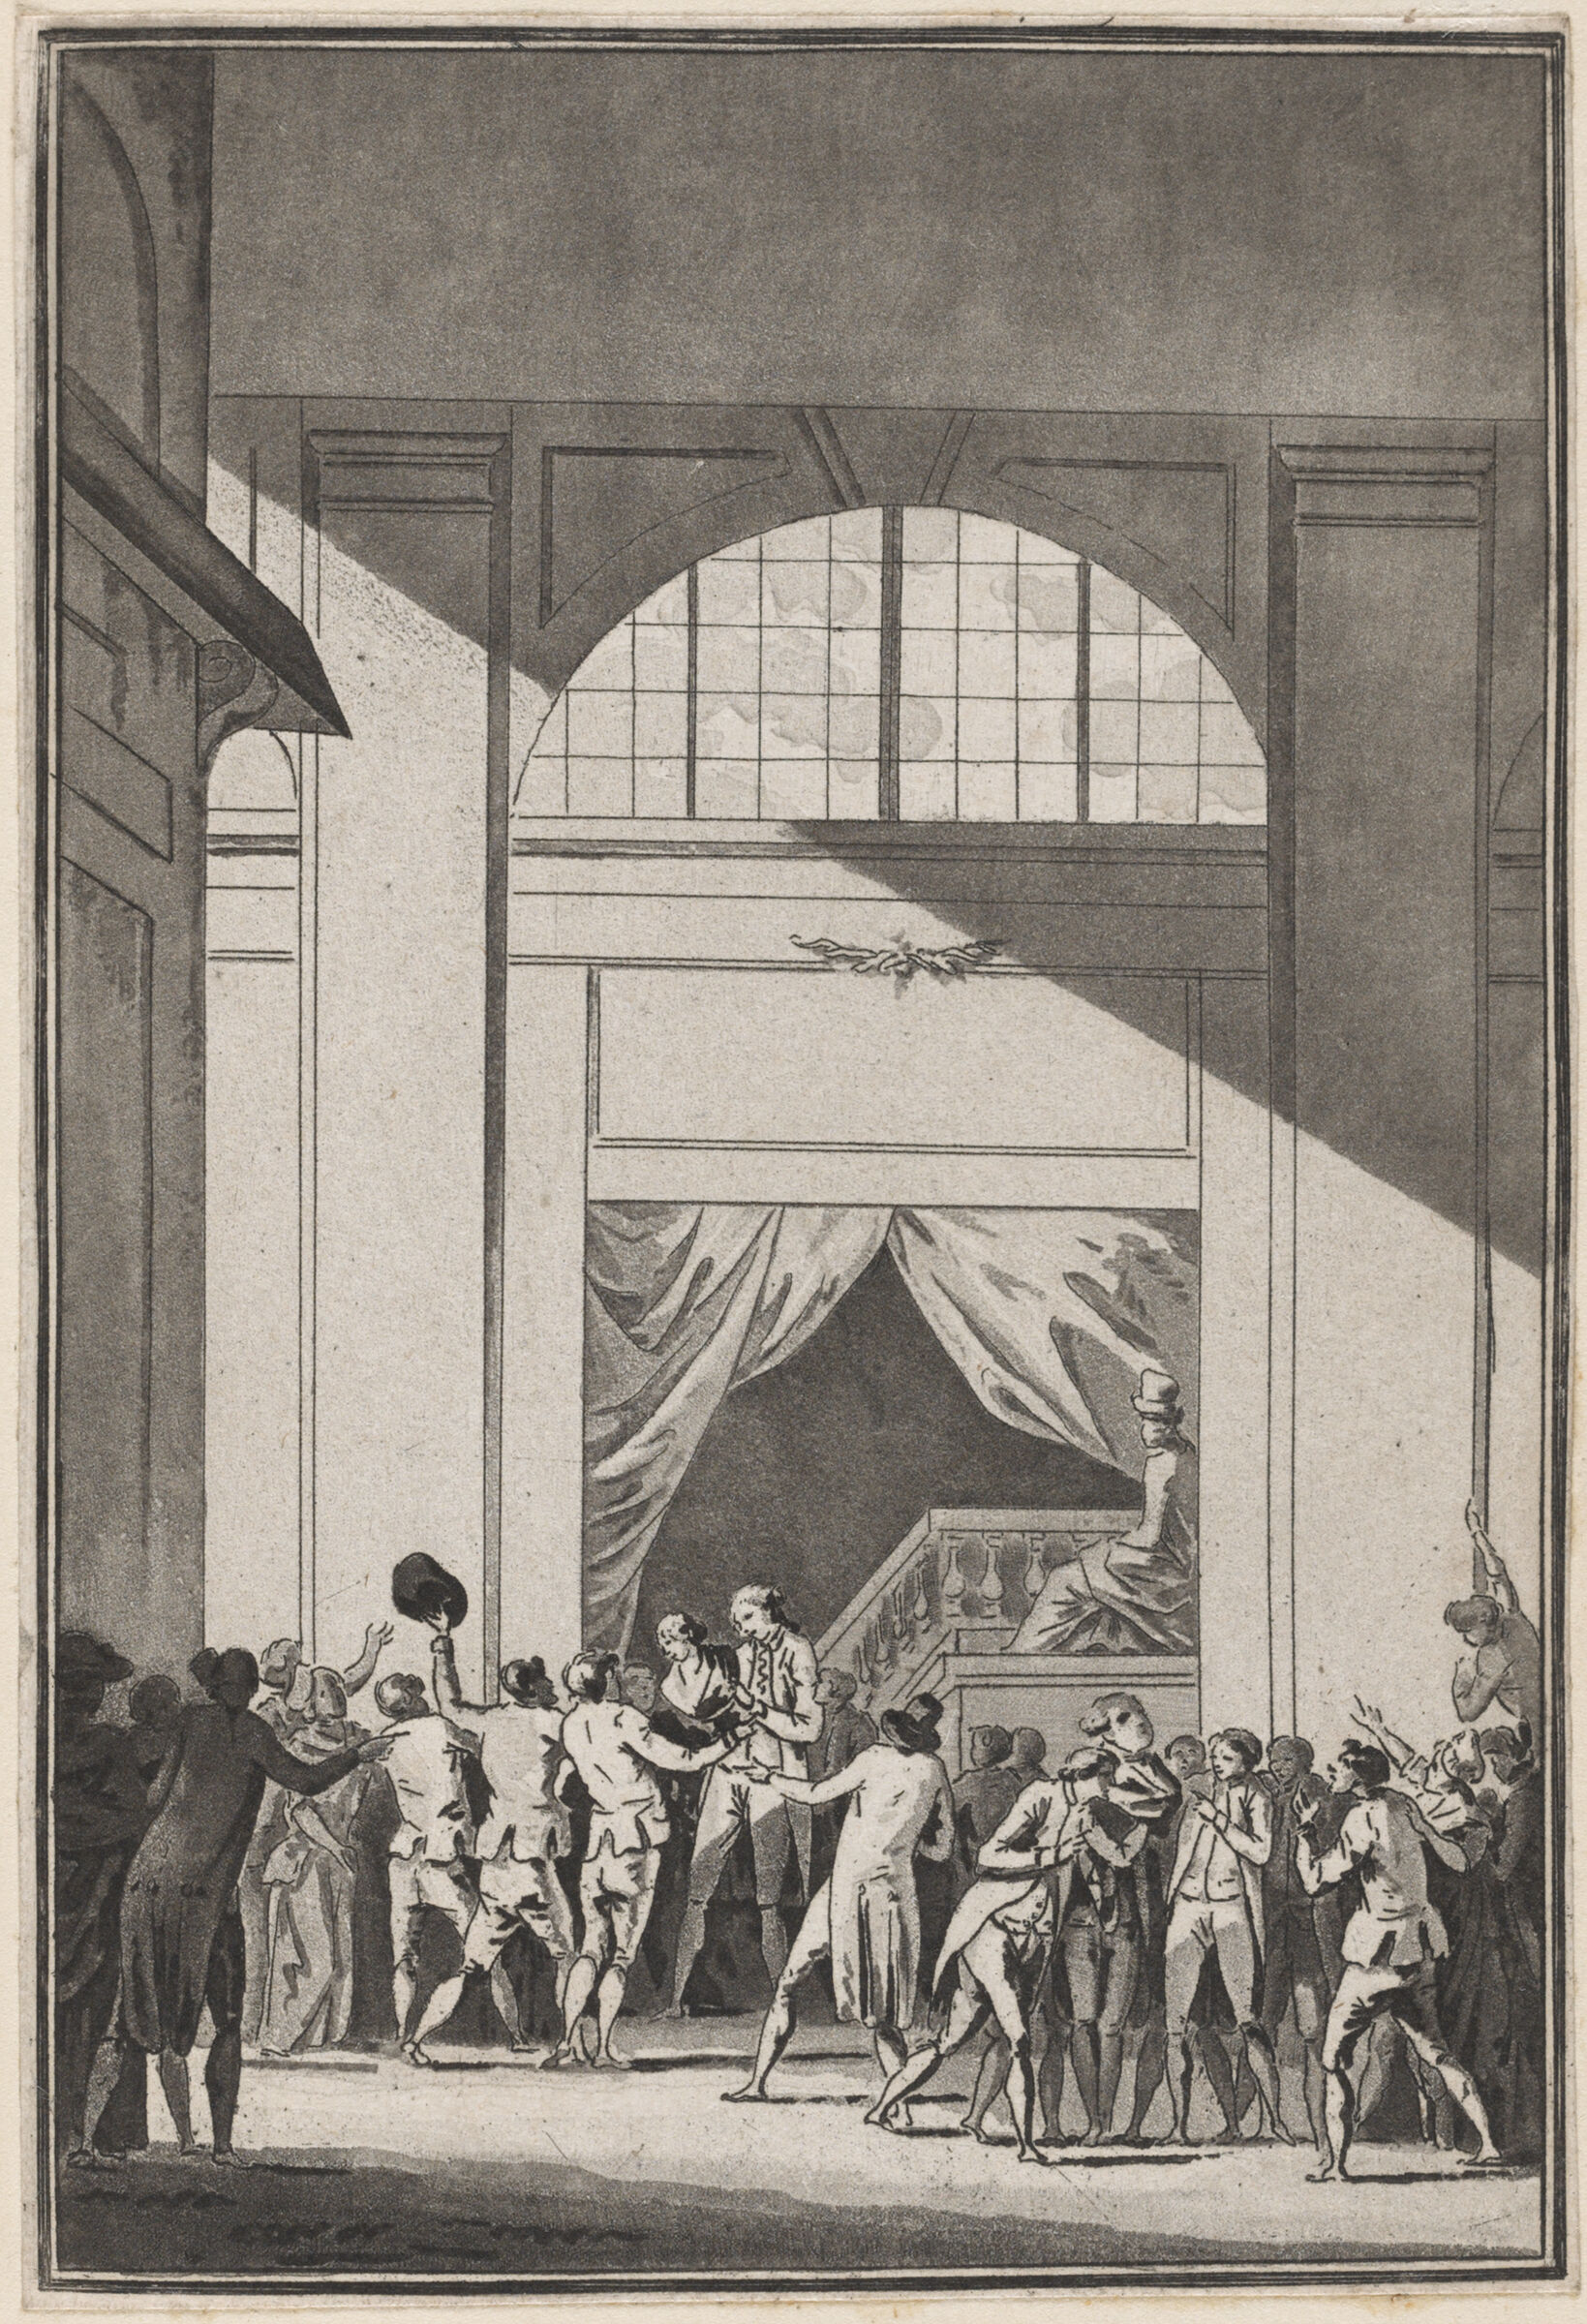 Curtius Delivers The Bust Portraits Of The Duc D'orleans And M. Necker, Which Were Then Carried In Triumph Through Paris (12 July 1789)